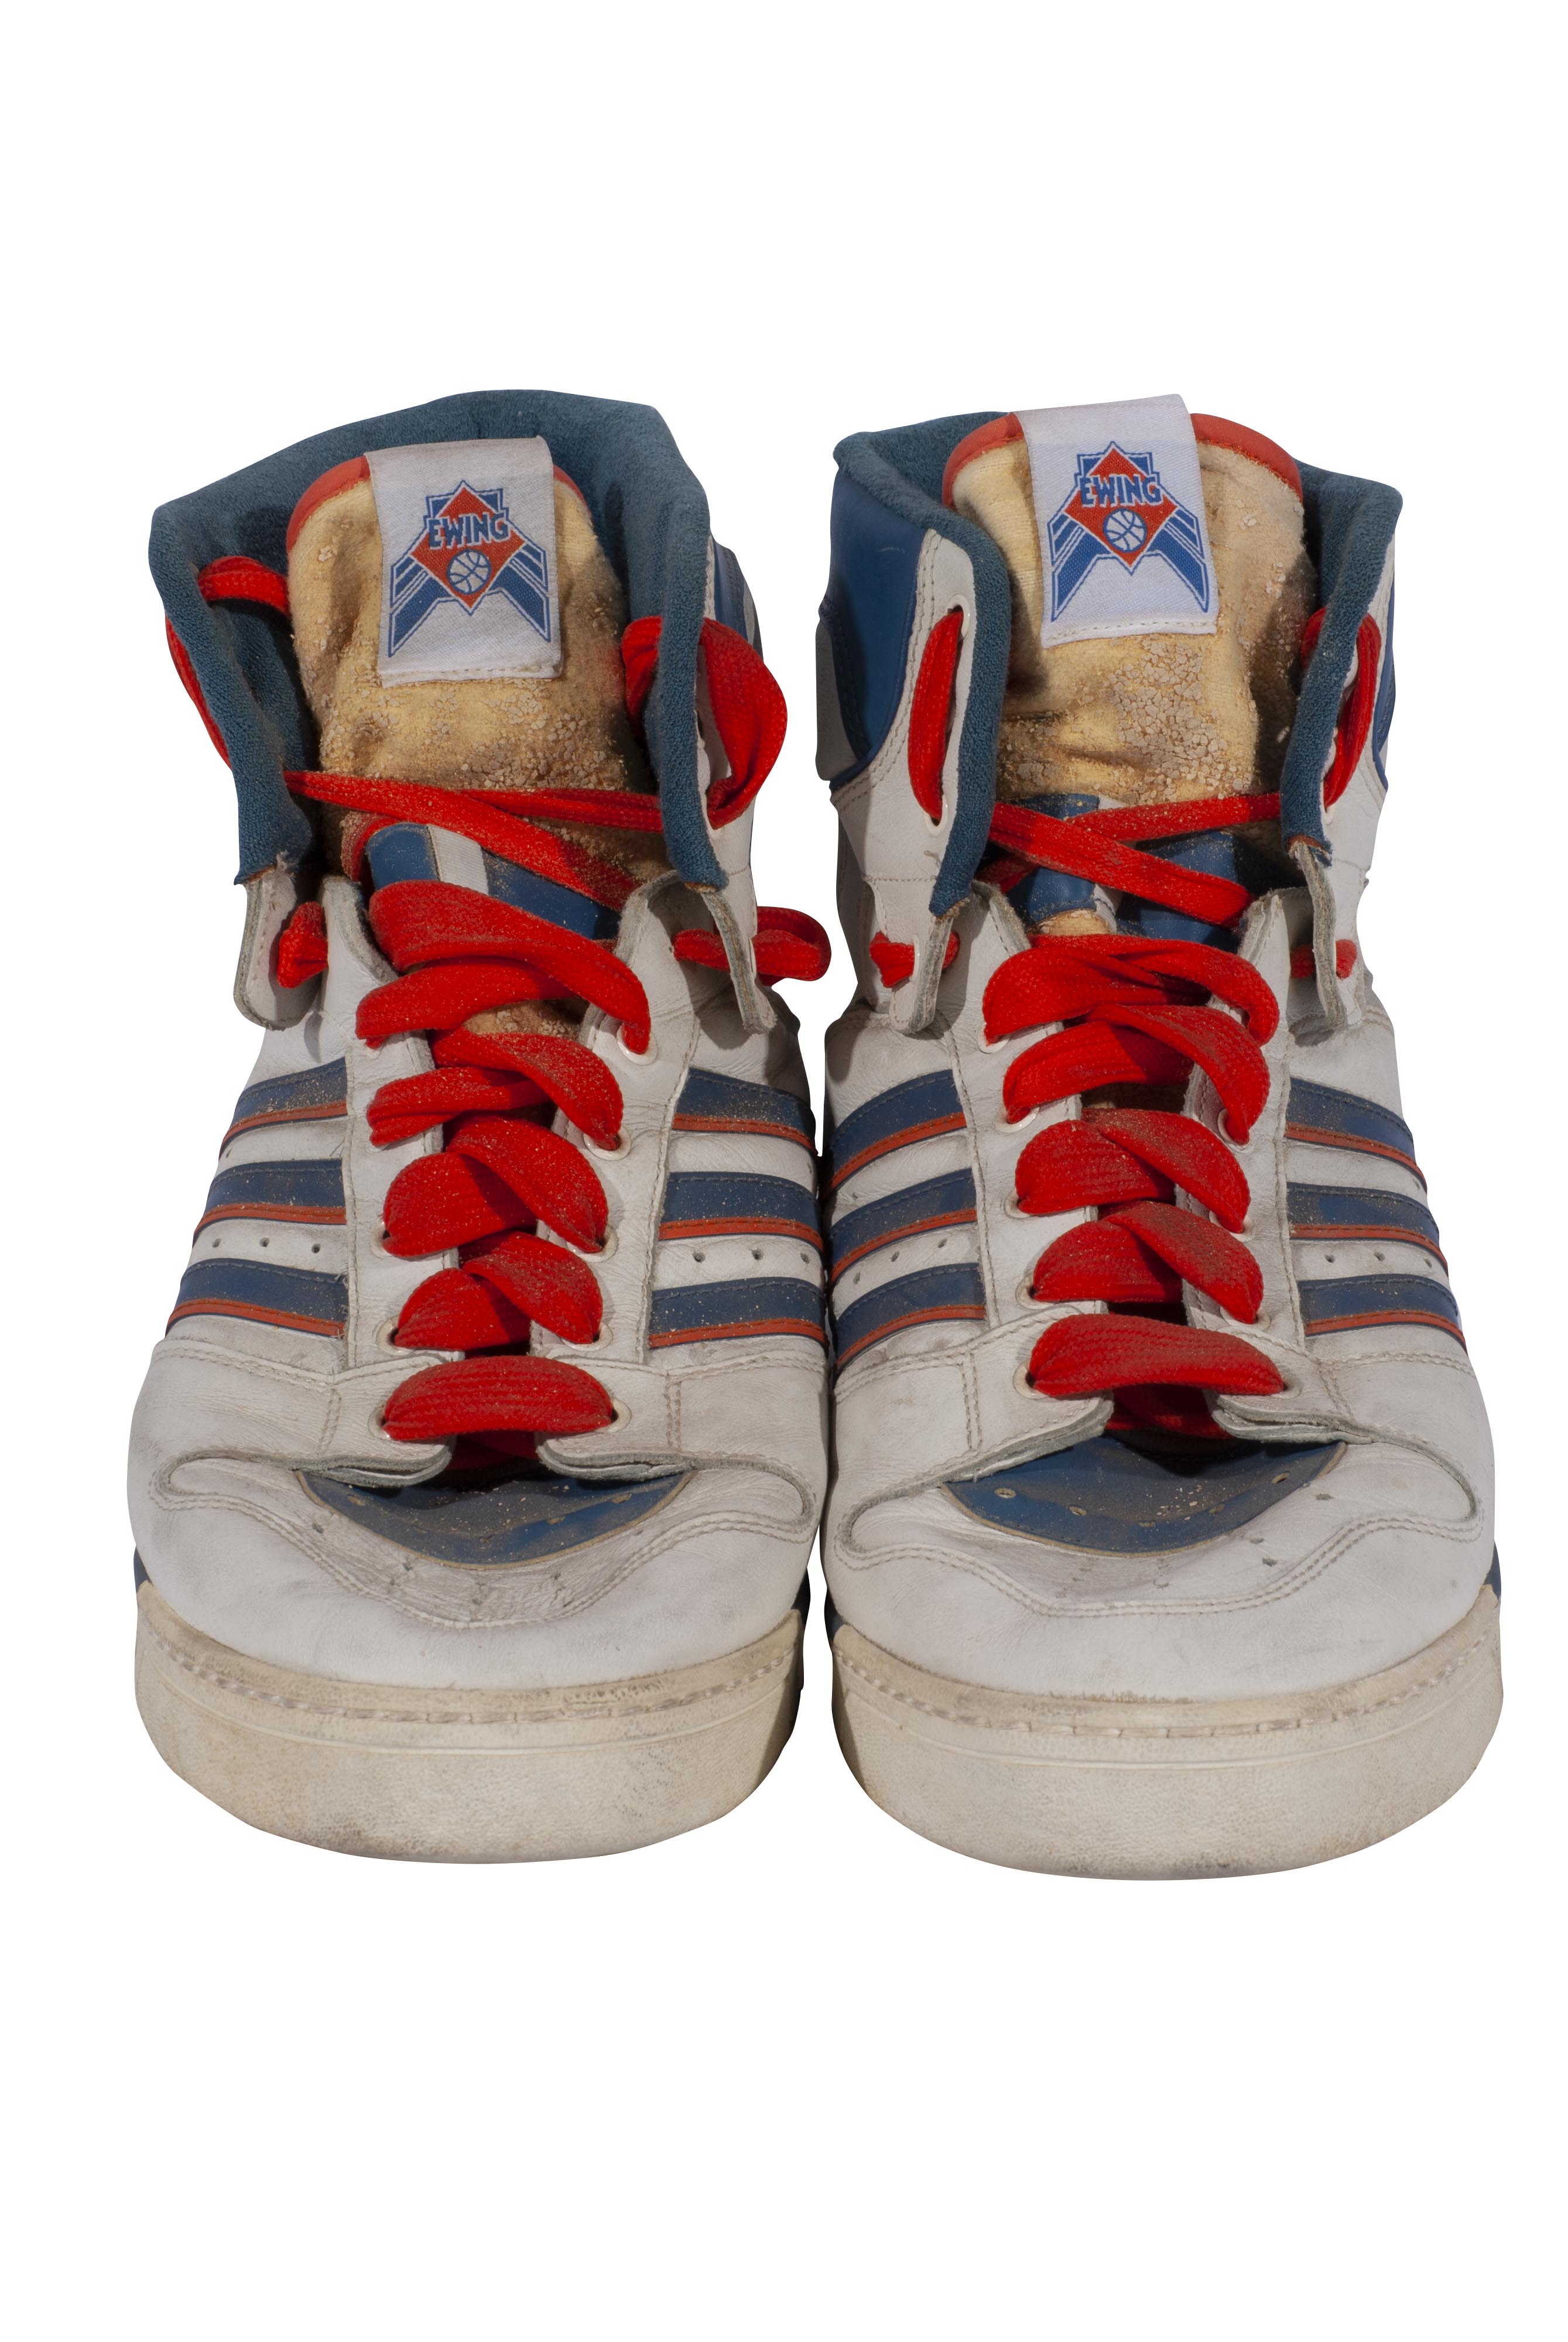 adidas Patrick Ewing Game Worn Conductor Player Exclusive